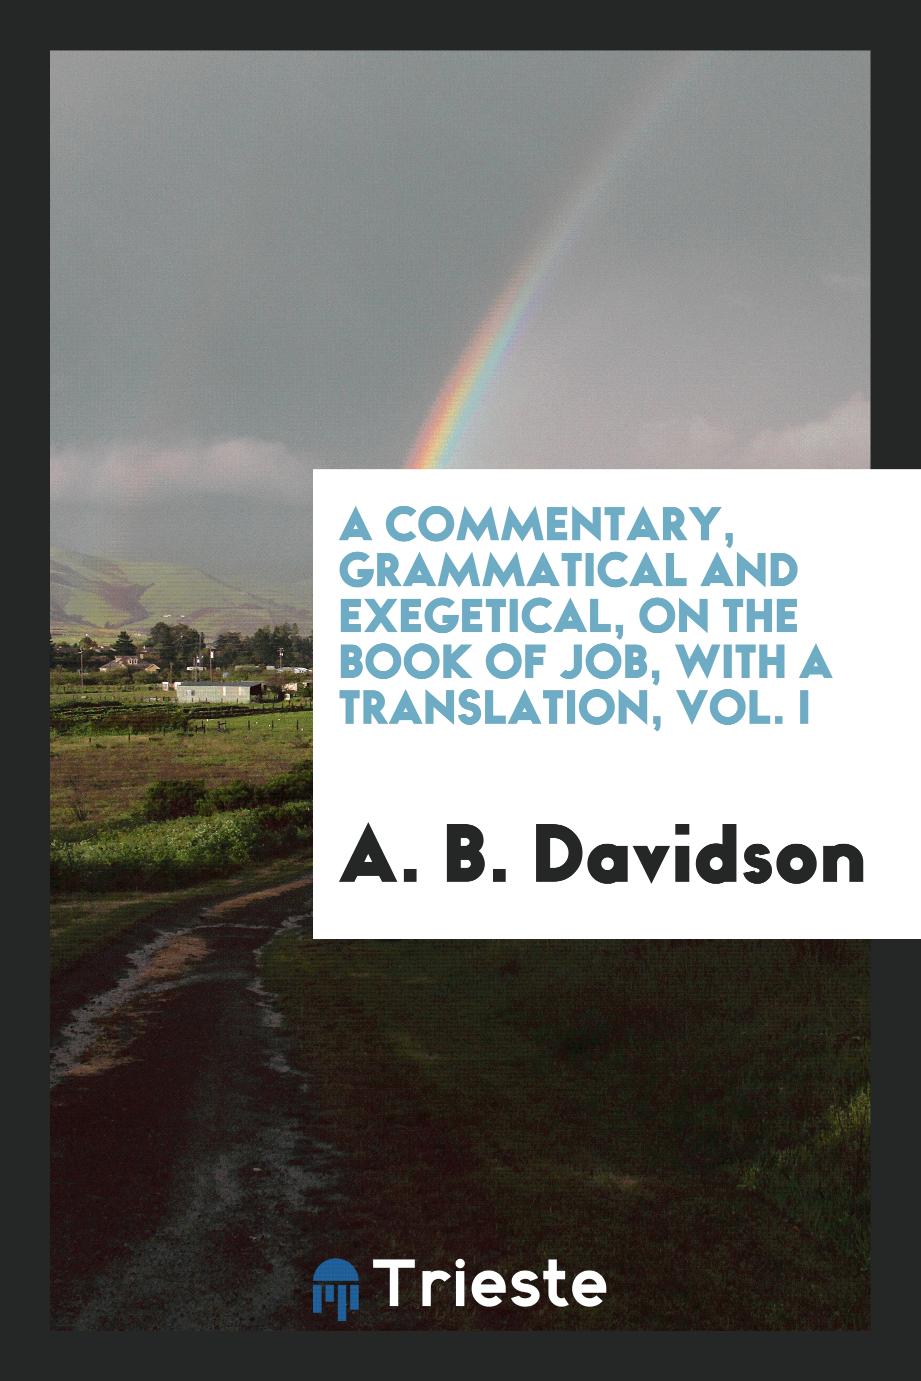 A Commentary, Grammatical and Exegetical, on the Book of Job, with a Translation, Vol. I